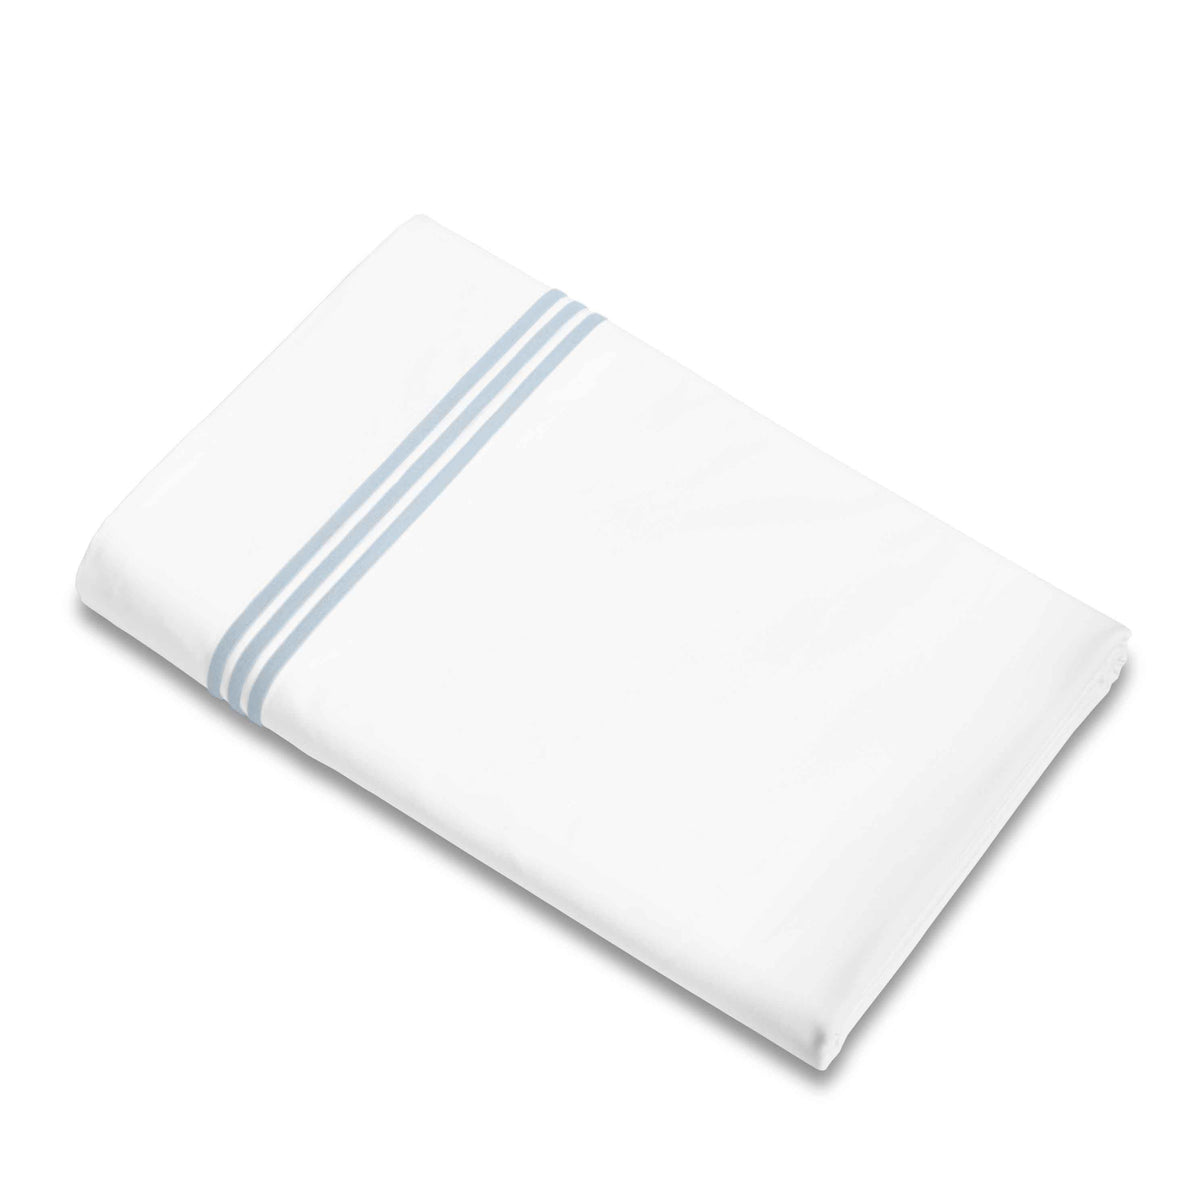 Flat Sheet of Signoria Platinum Percale Bedding in White/Sky Blue Color